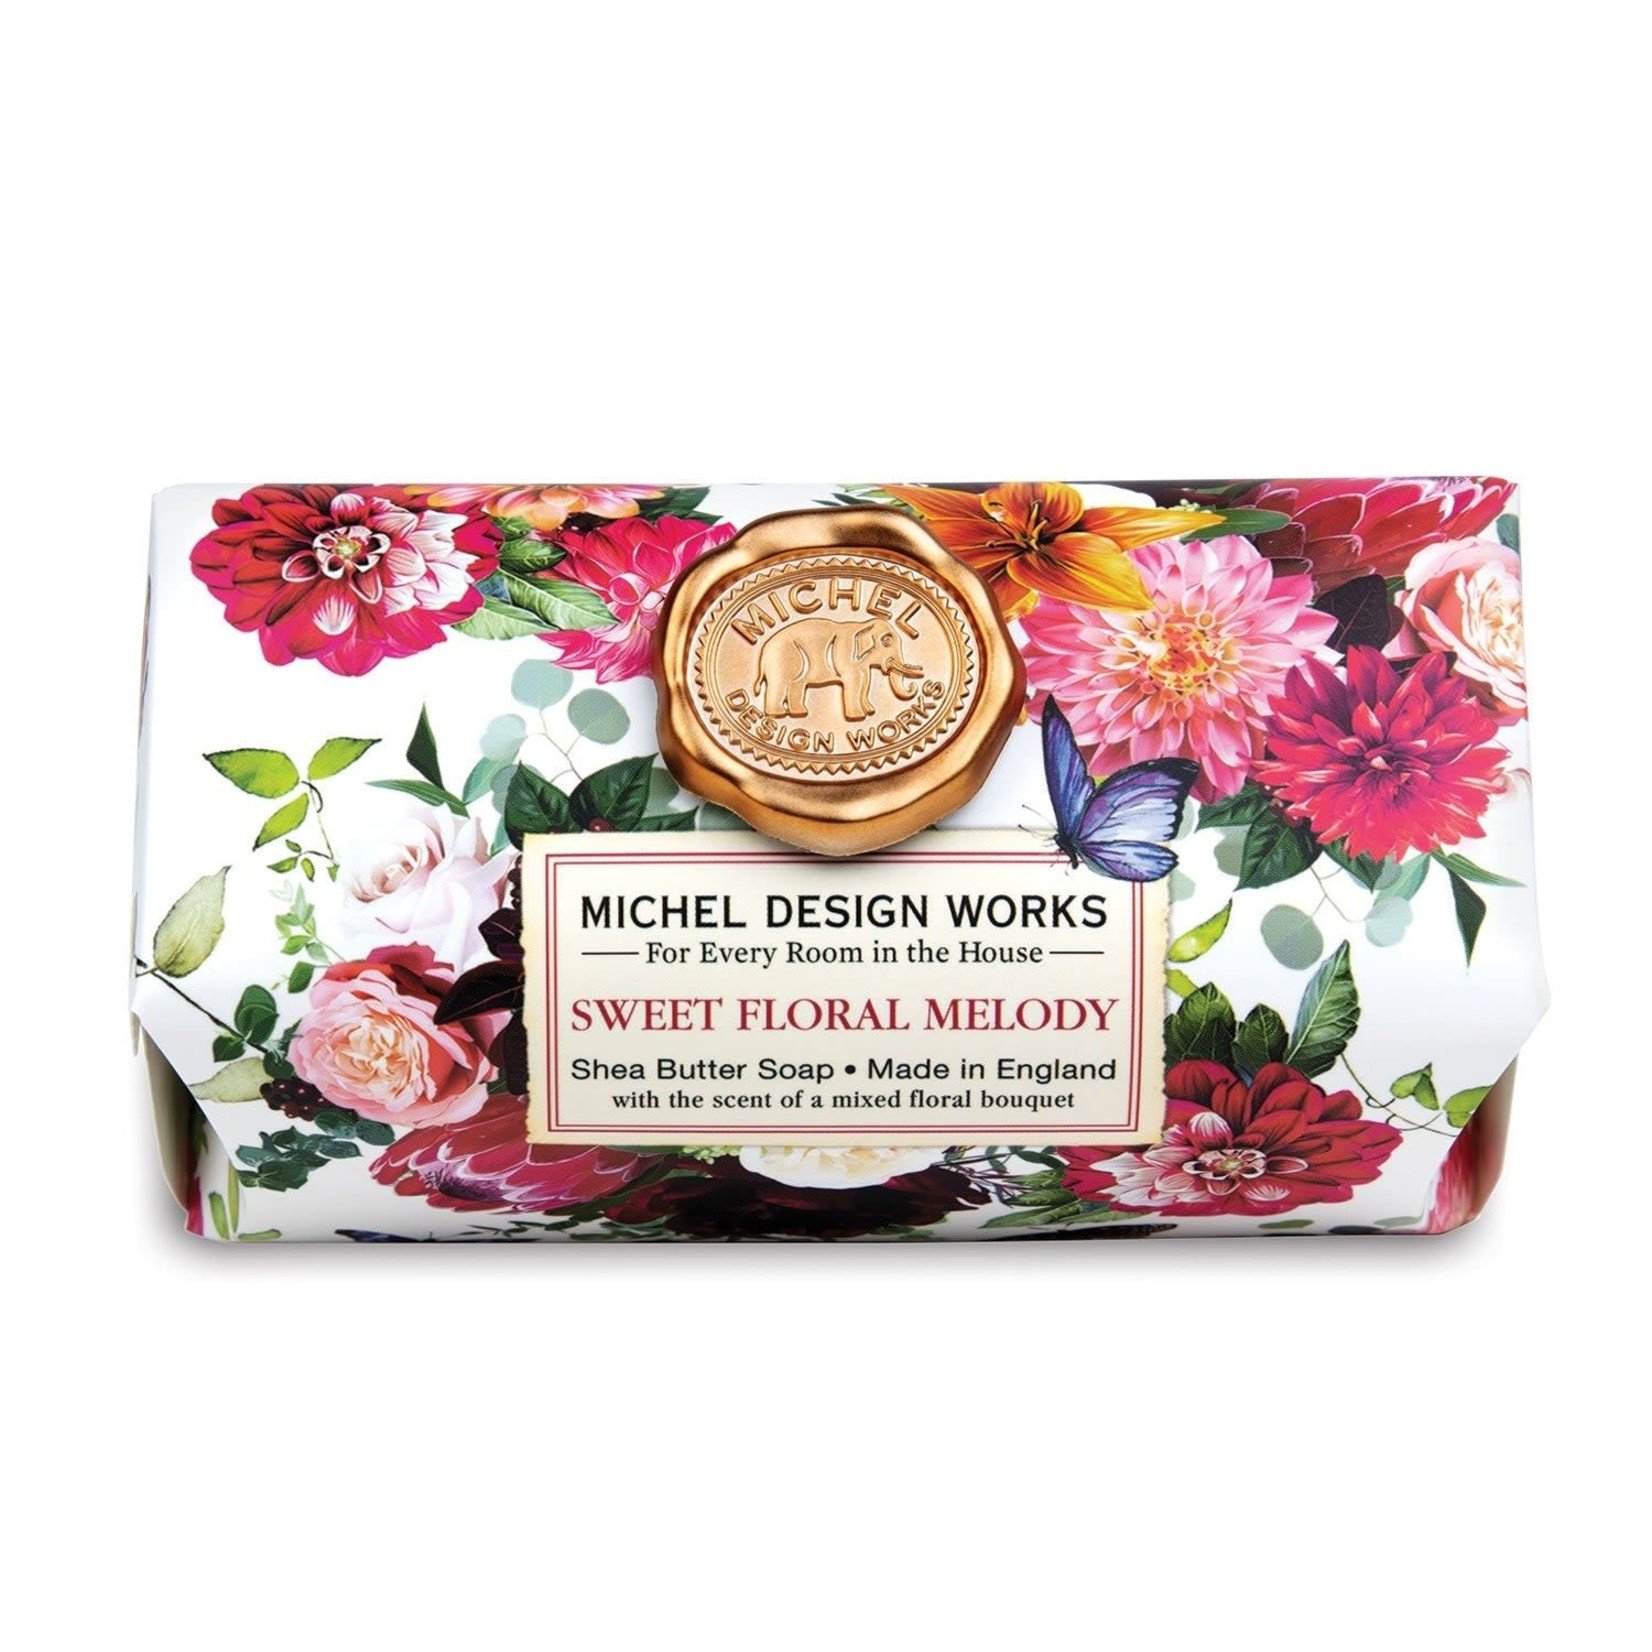 SWEET FLORAL MELODY LG SOAP